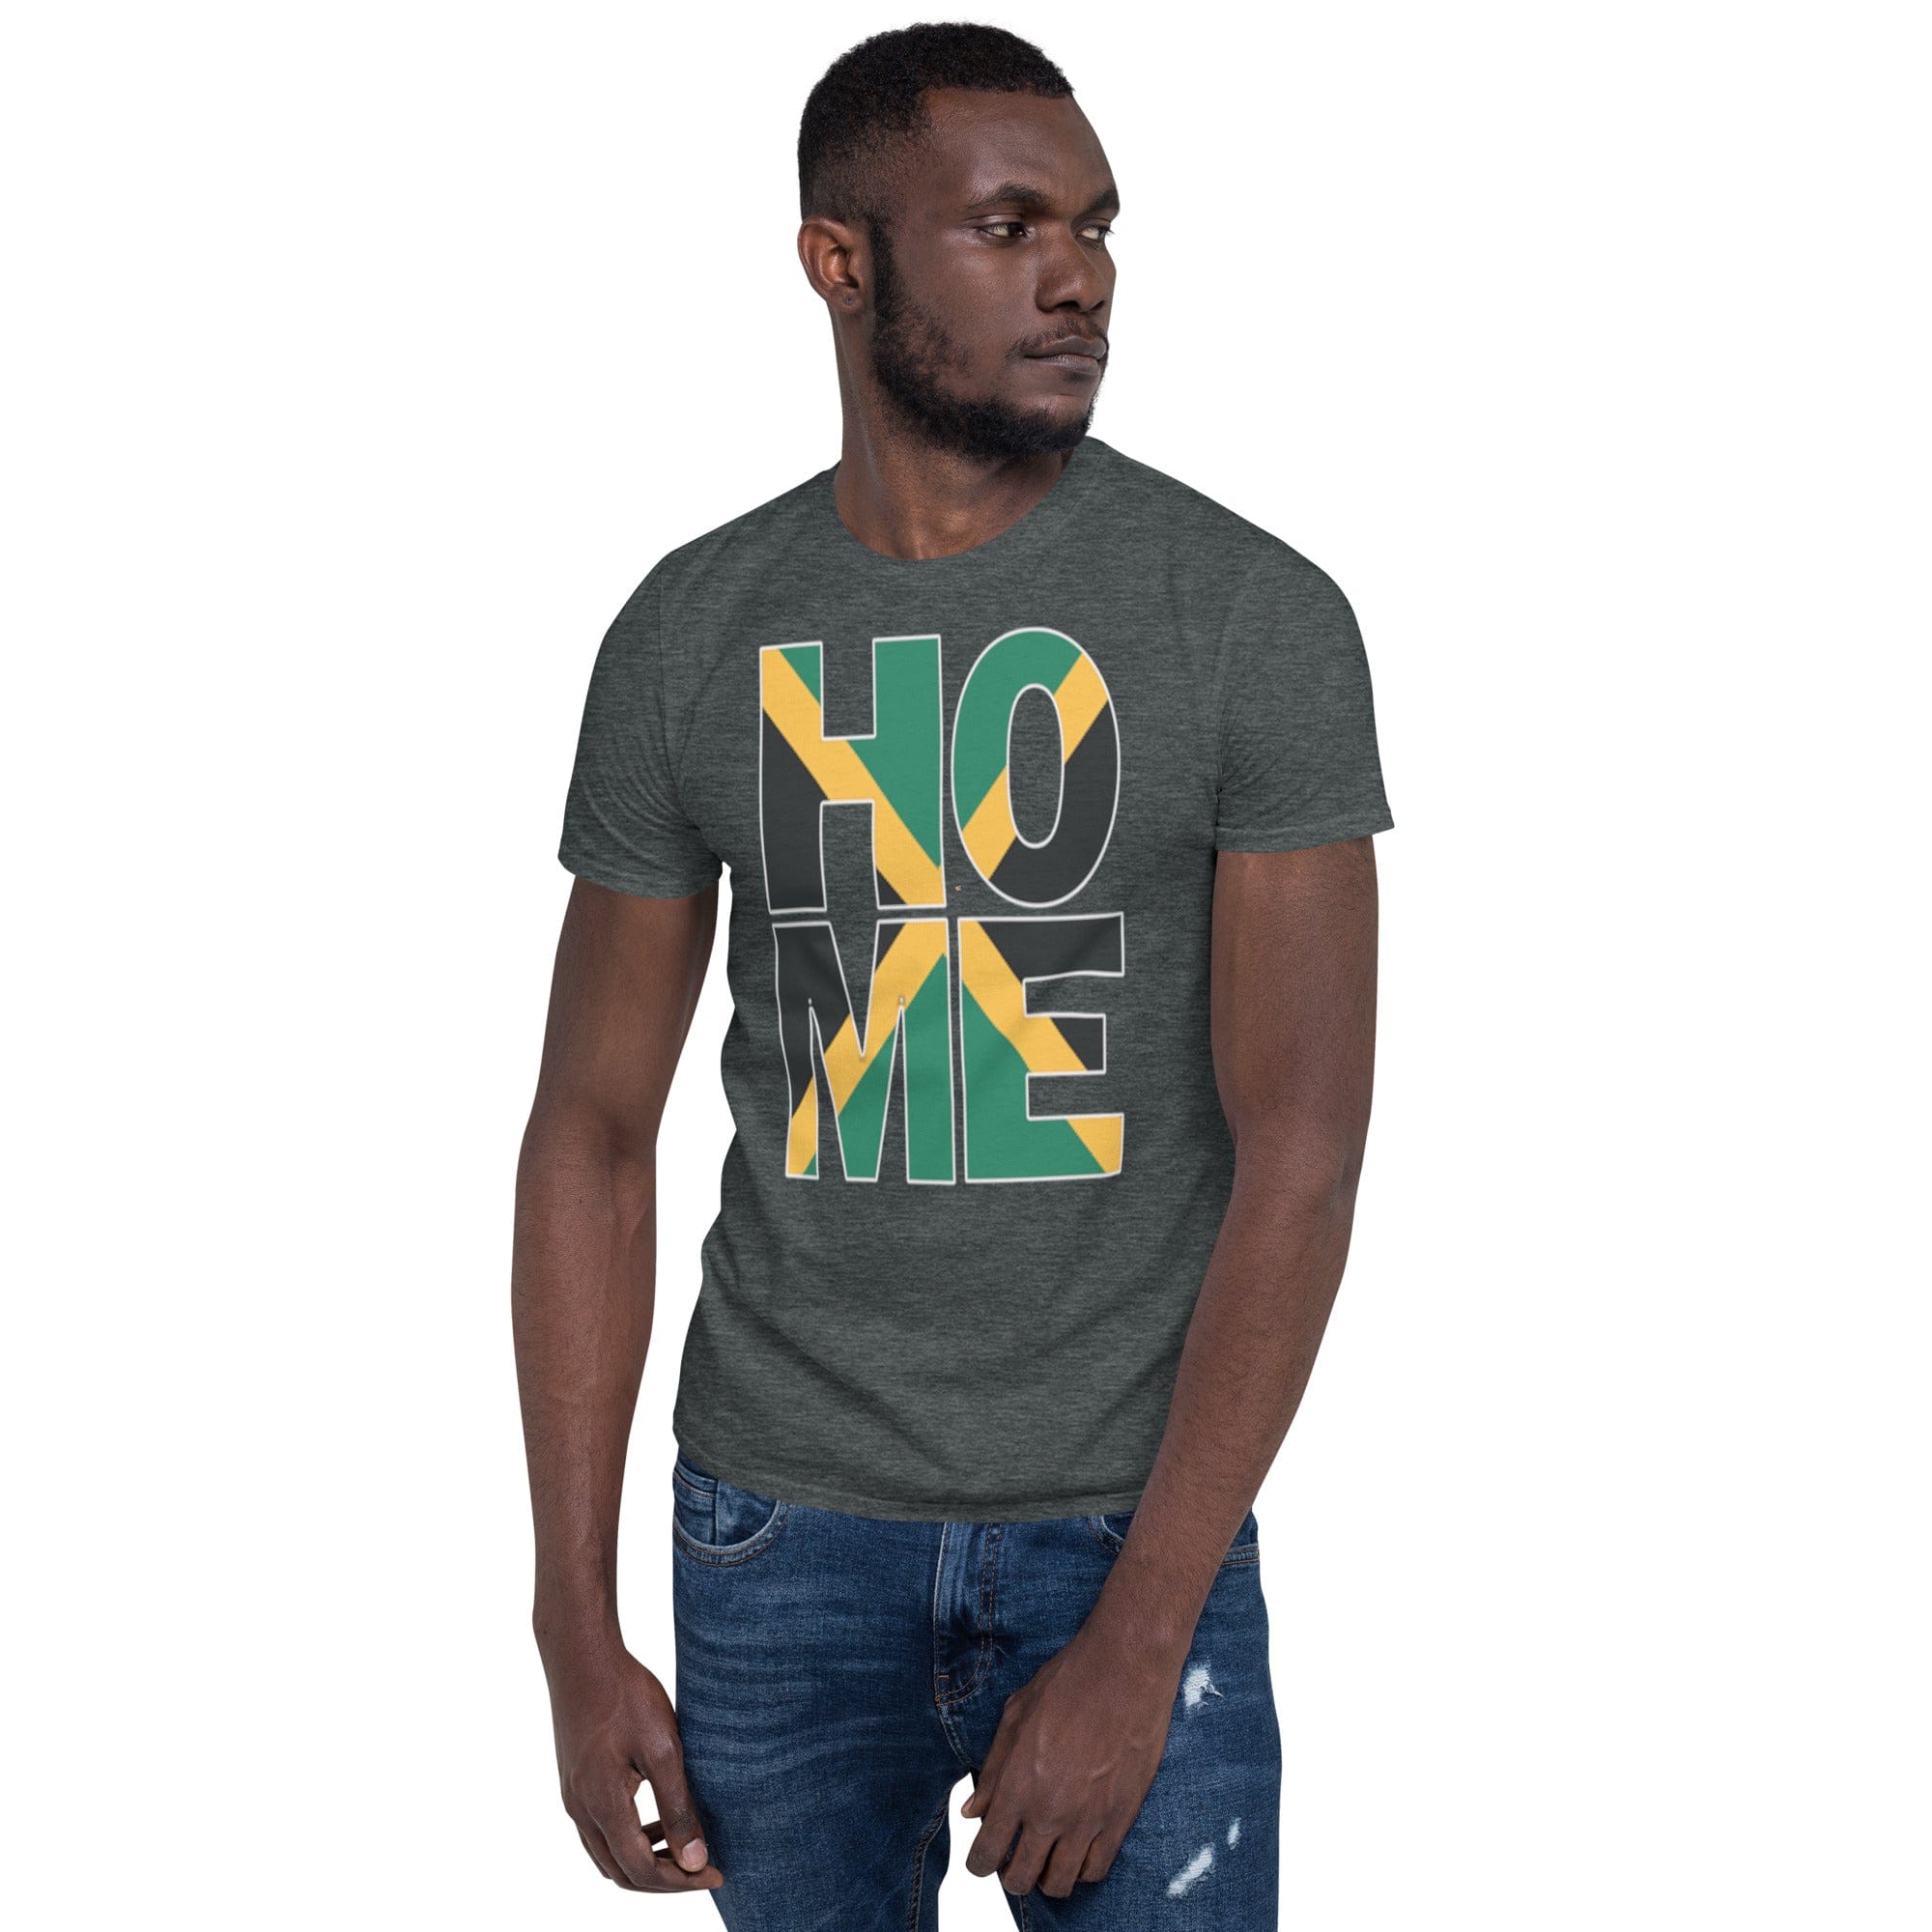 Jamaica flag design in the words HOME on a dark heather color shirt on the front of a black man.